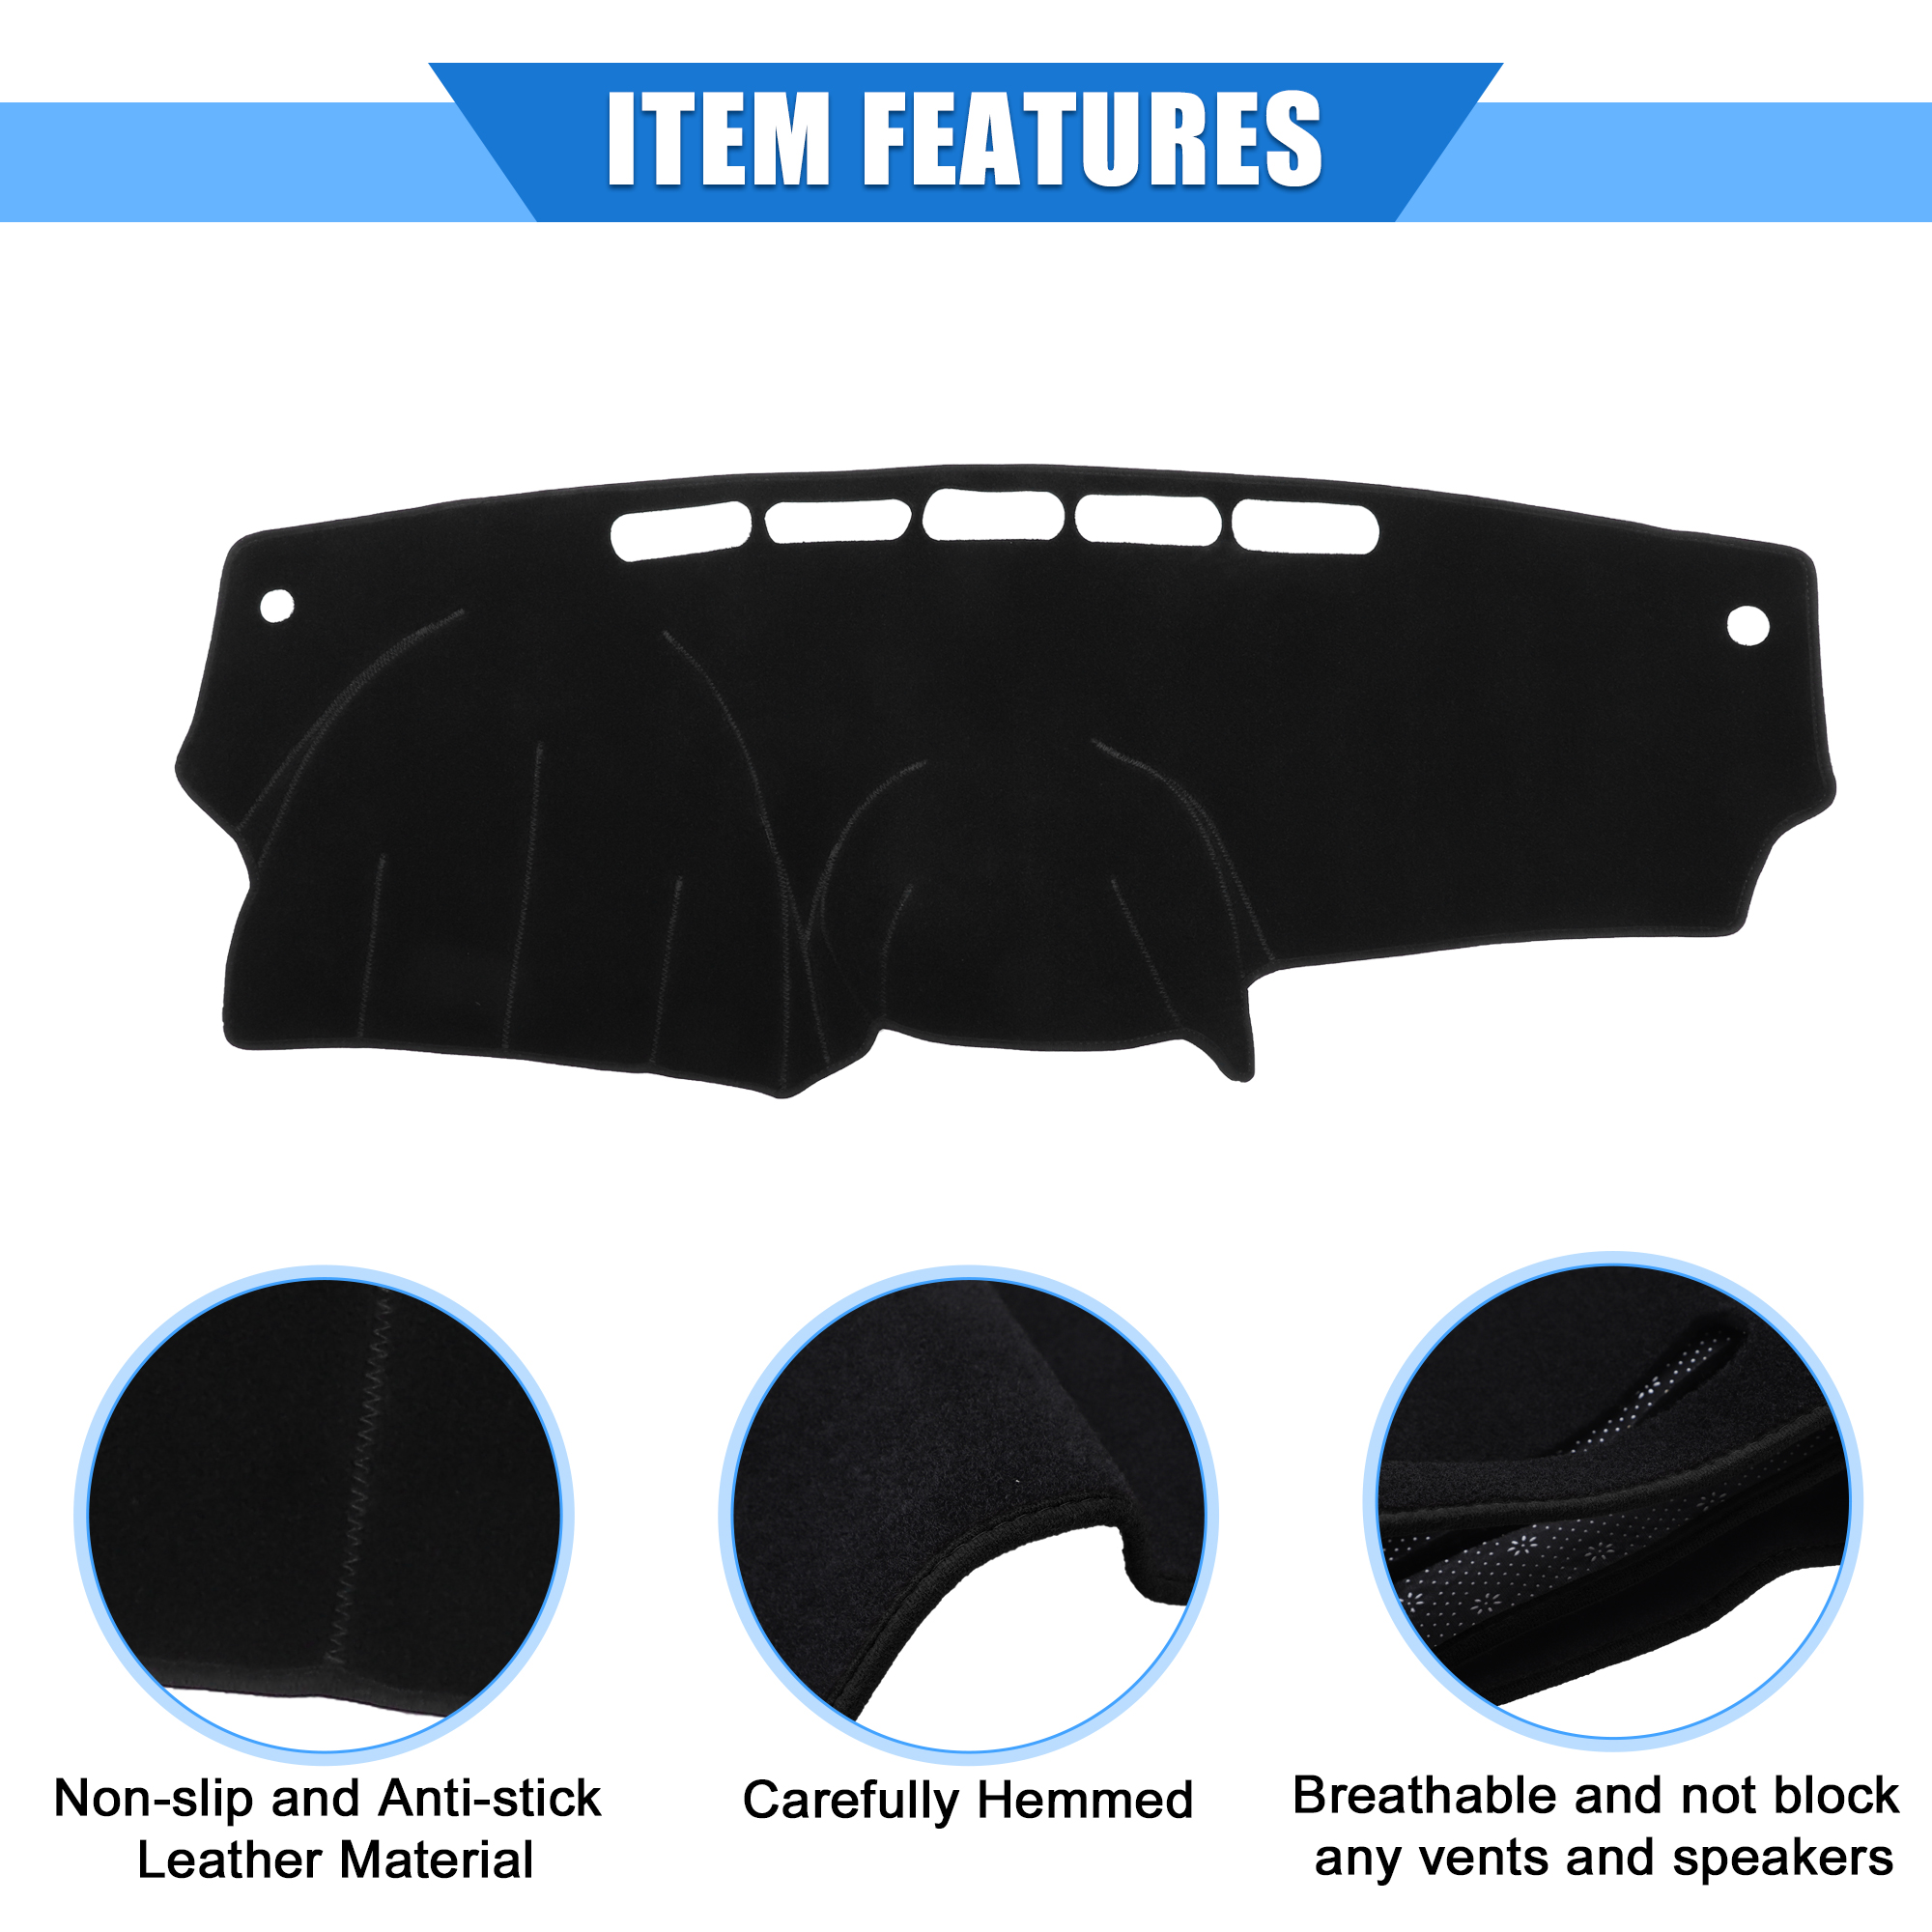 Unique Bargains Car Dashboard Cover Mat for Nissan Versa 2012-2018 Protective Polyester Black